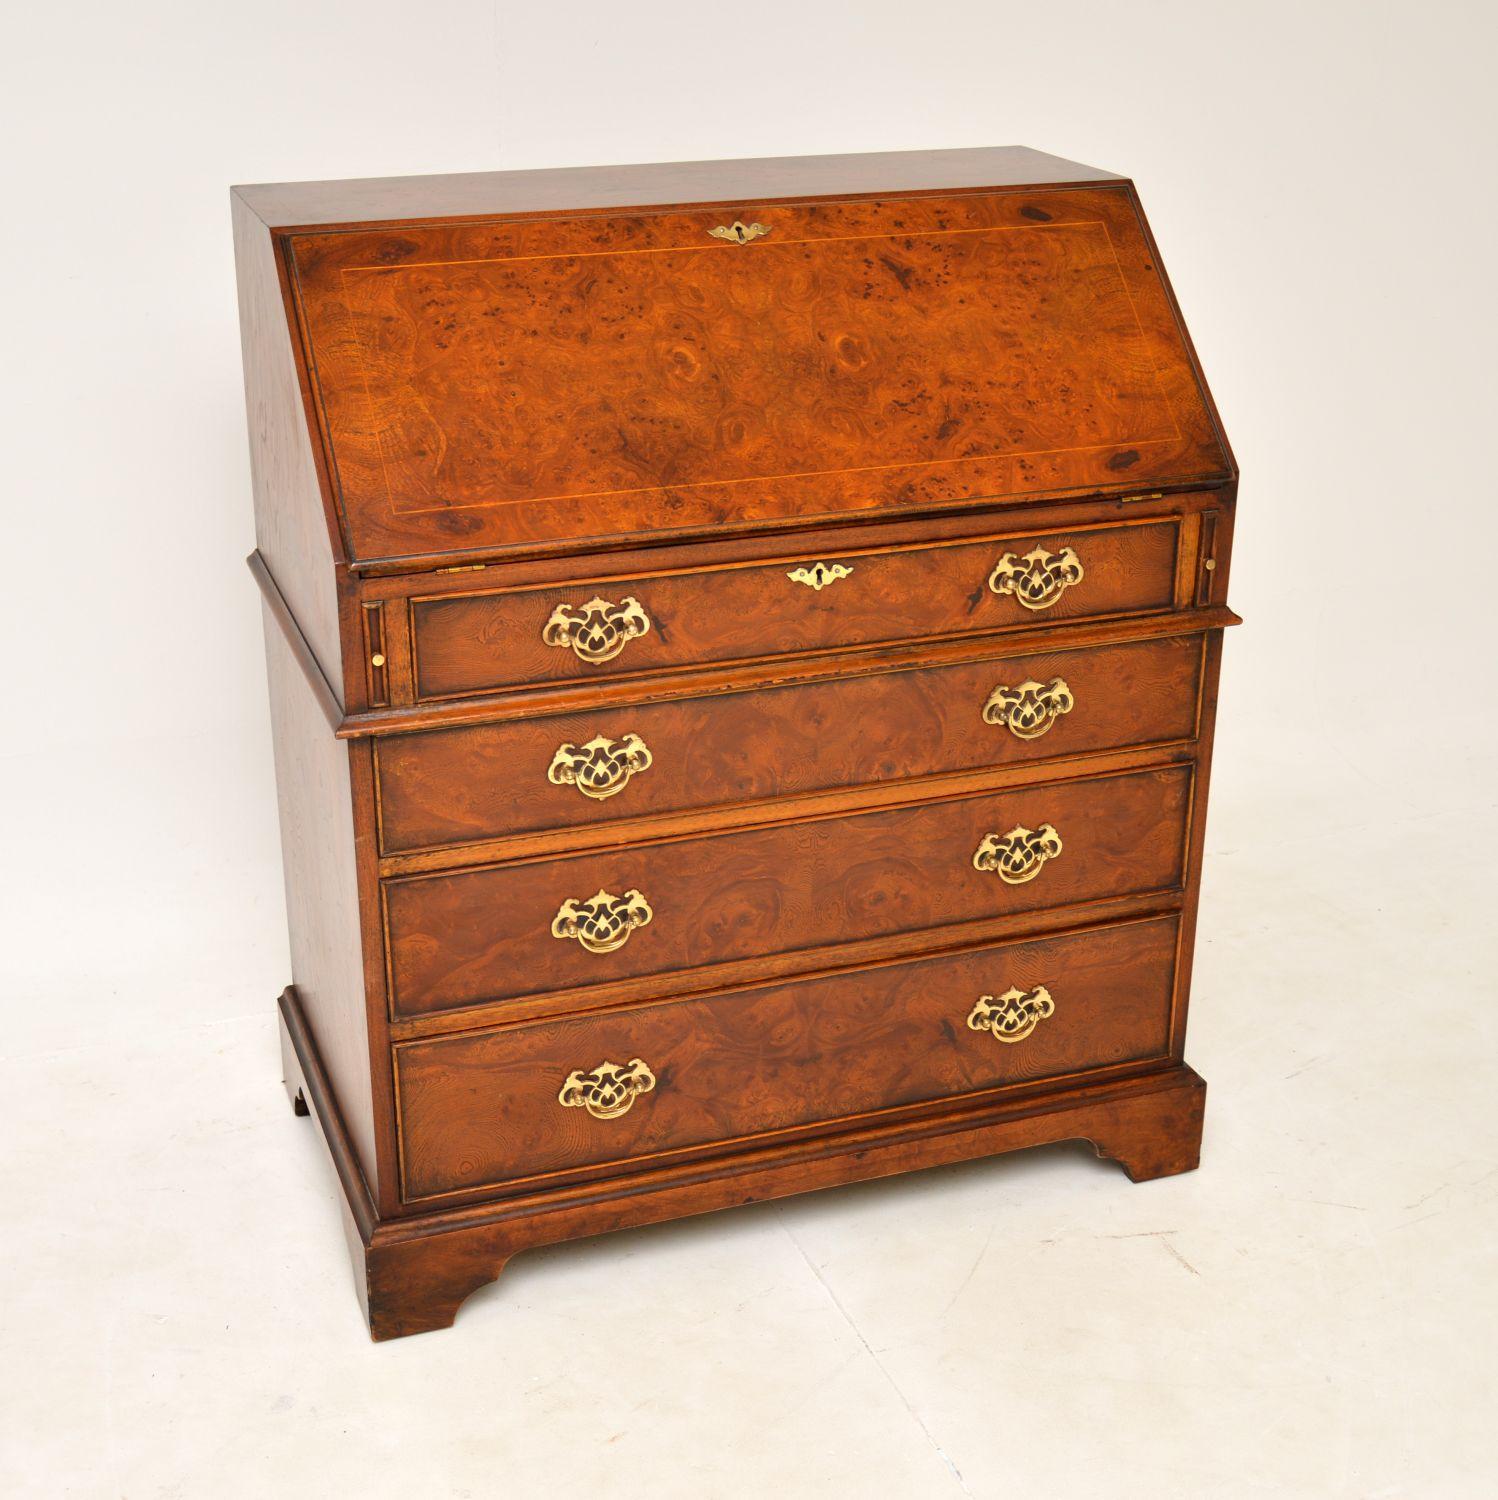 A stunning antique burr elm writing bureau in the Georgian style. This was made in England, it dates from around the 1950’s.

The quality is outstanding, this is extremely well made with stunning burr elm grain patterns. Inside the pull down